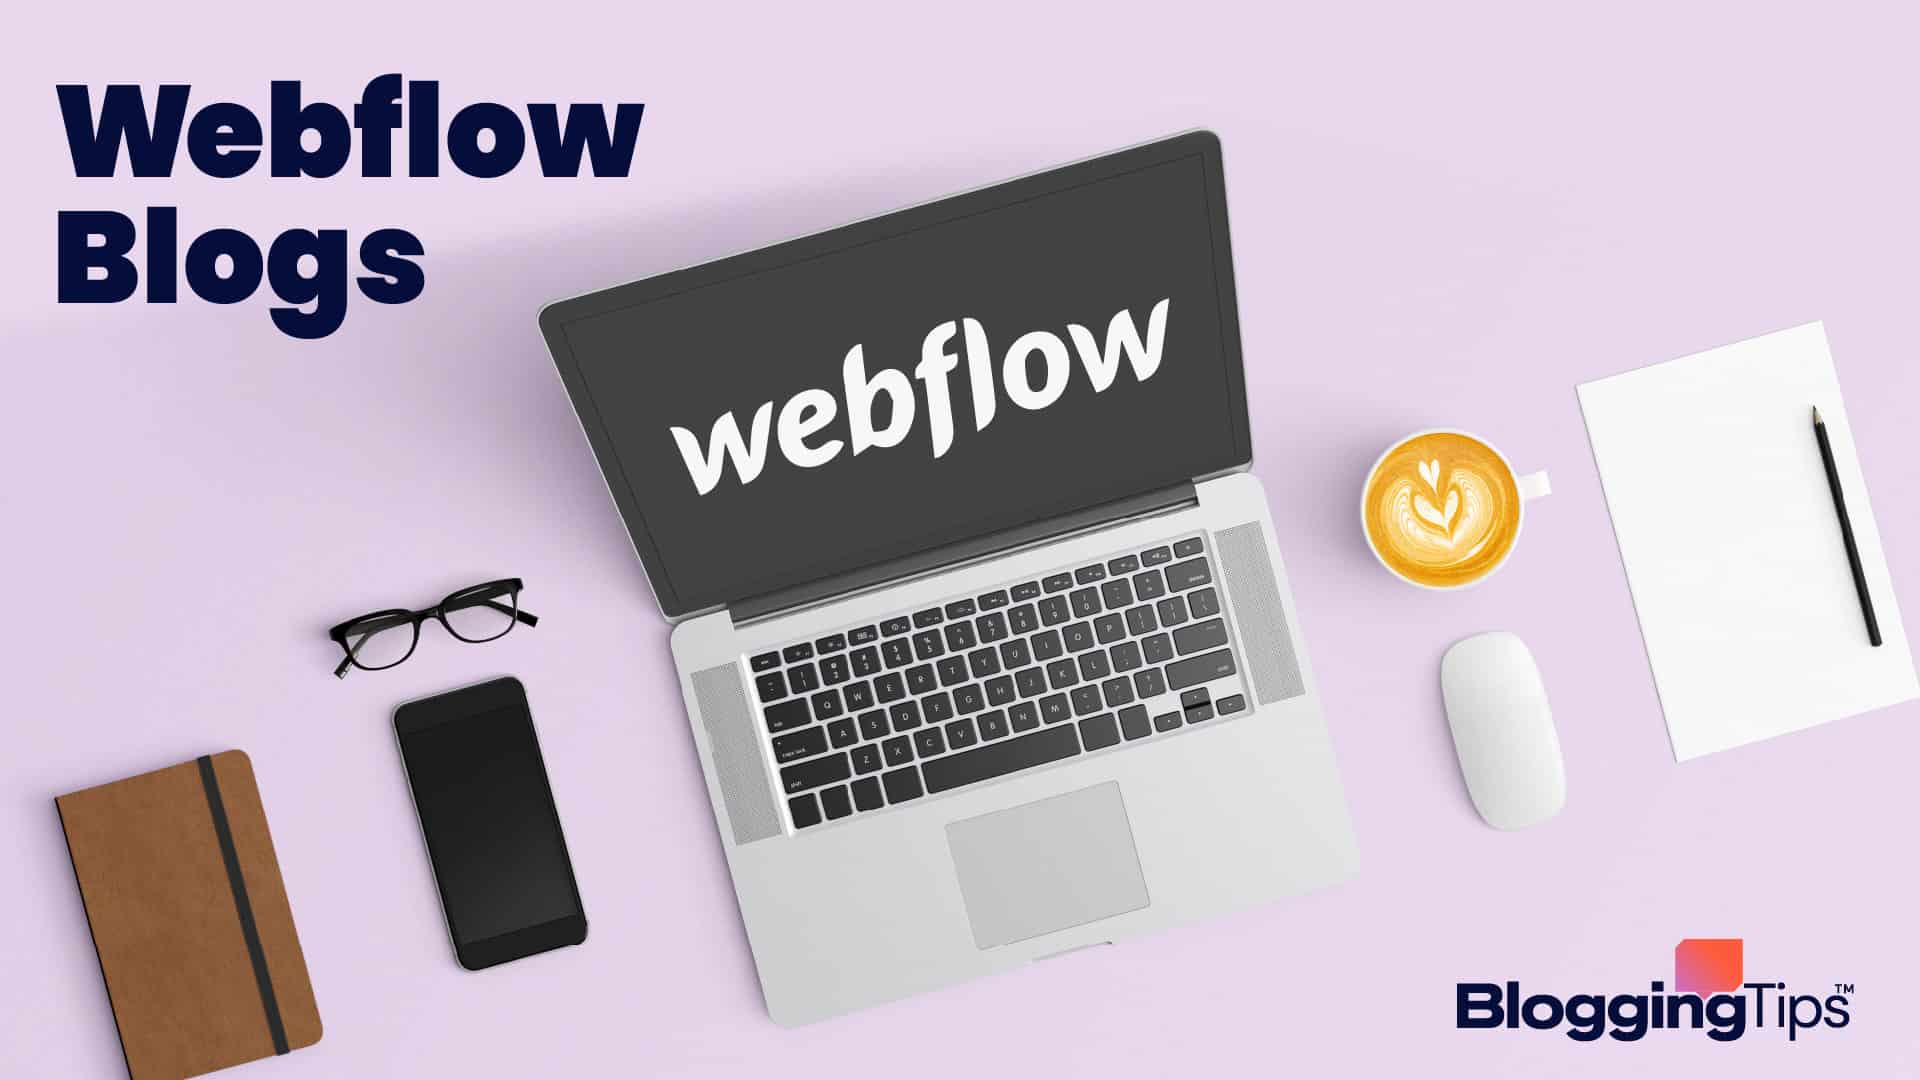 vector graphic showing an illustration of a webflow logo on a computer screen with the big block text 